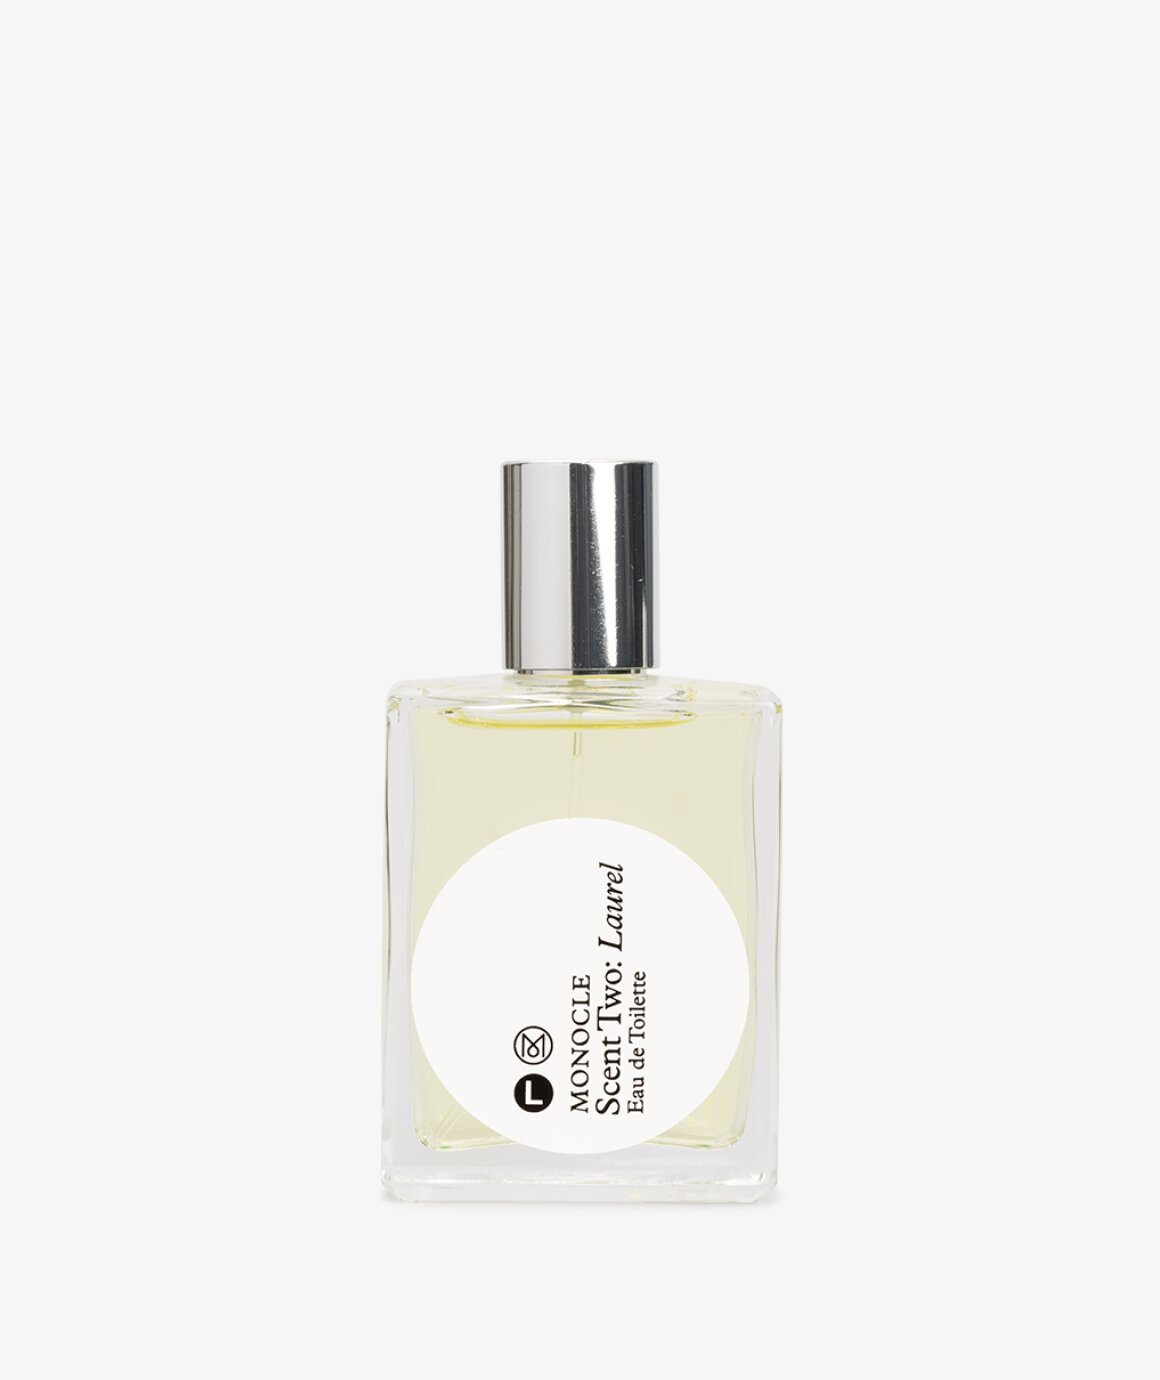 Norse Store | Shipping Worldwide - Monocle Scent Two Laurel 50ml